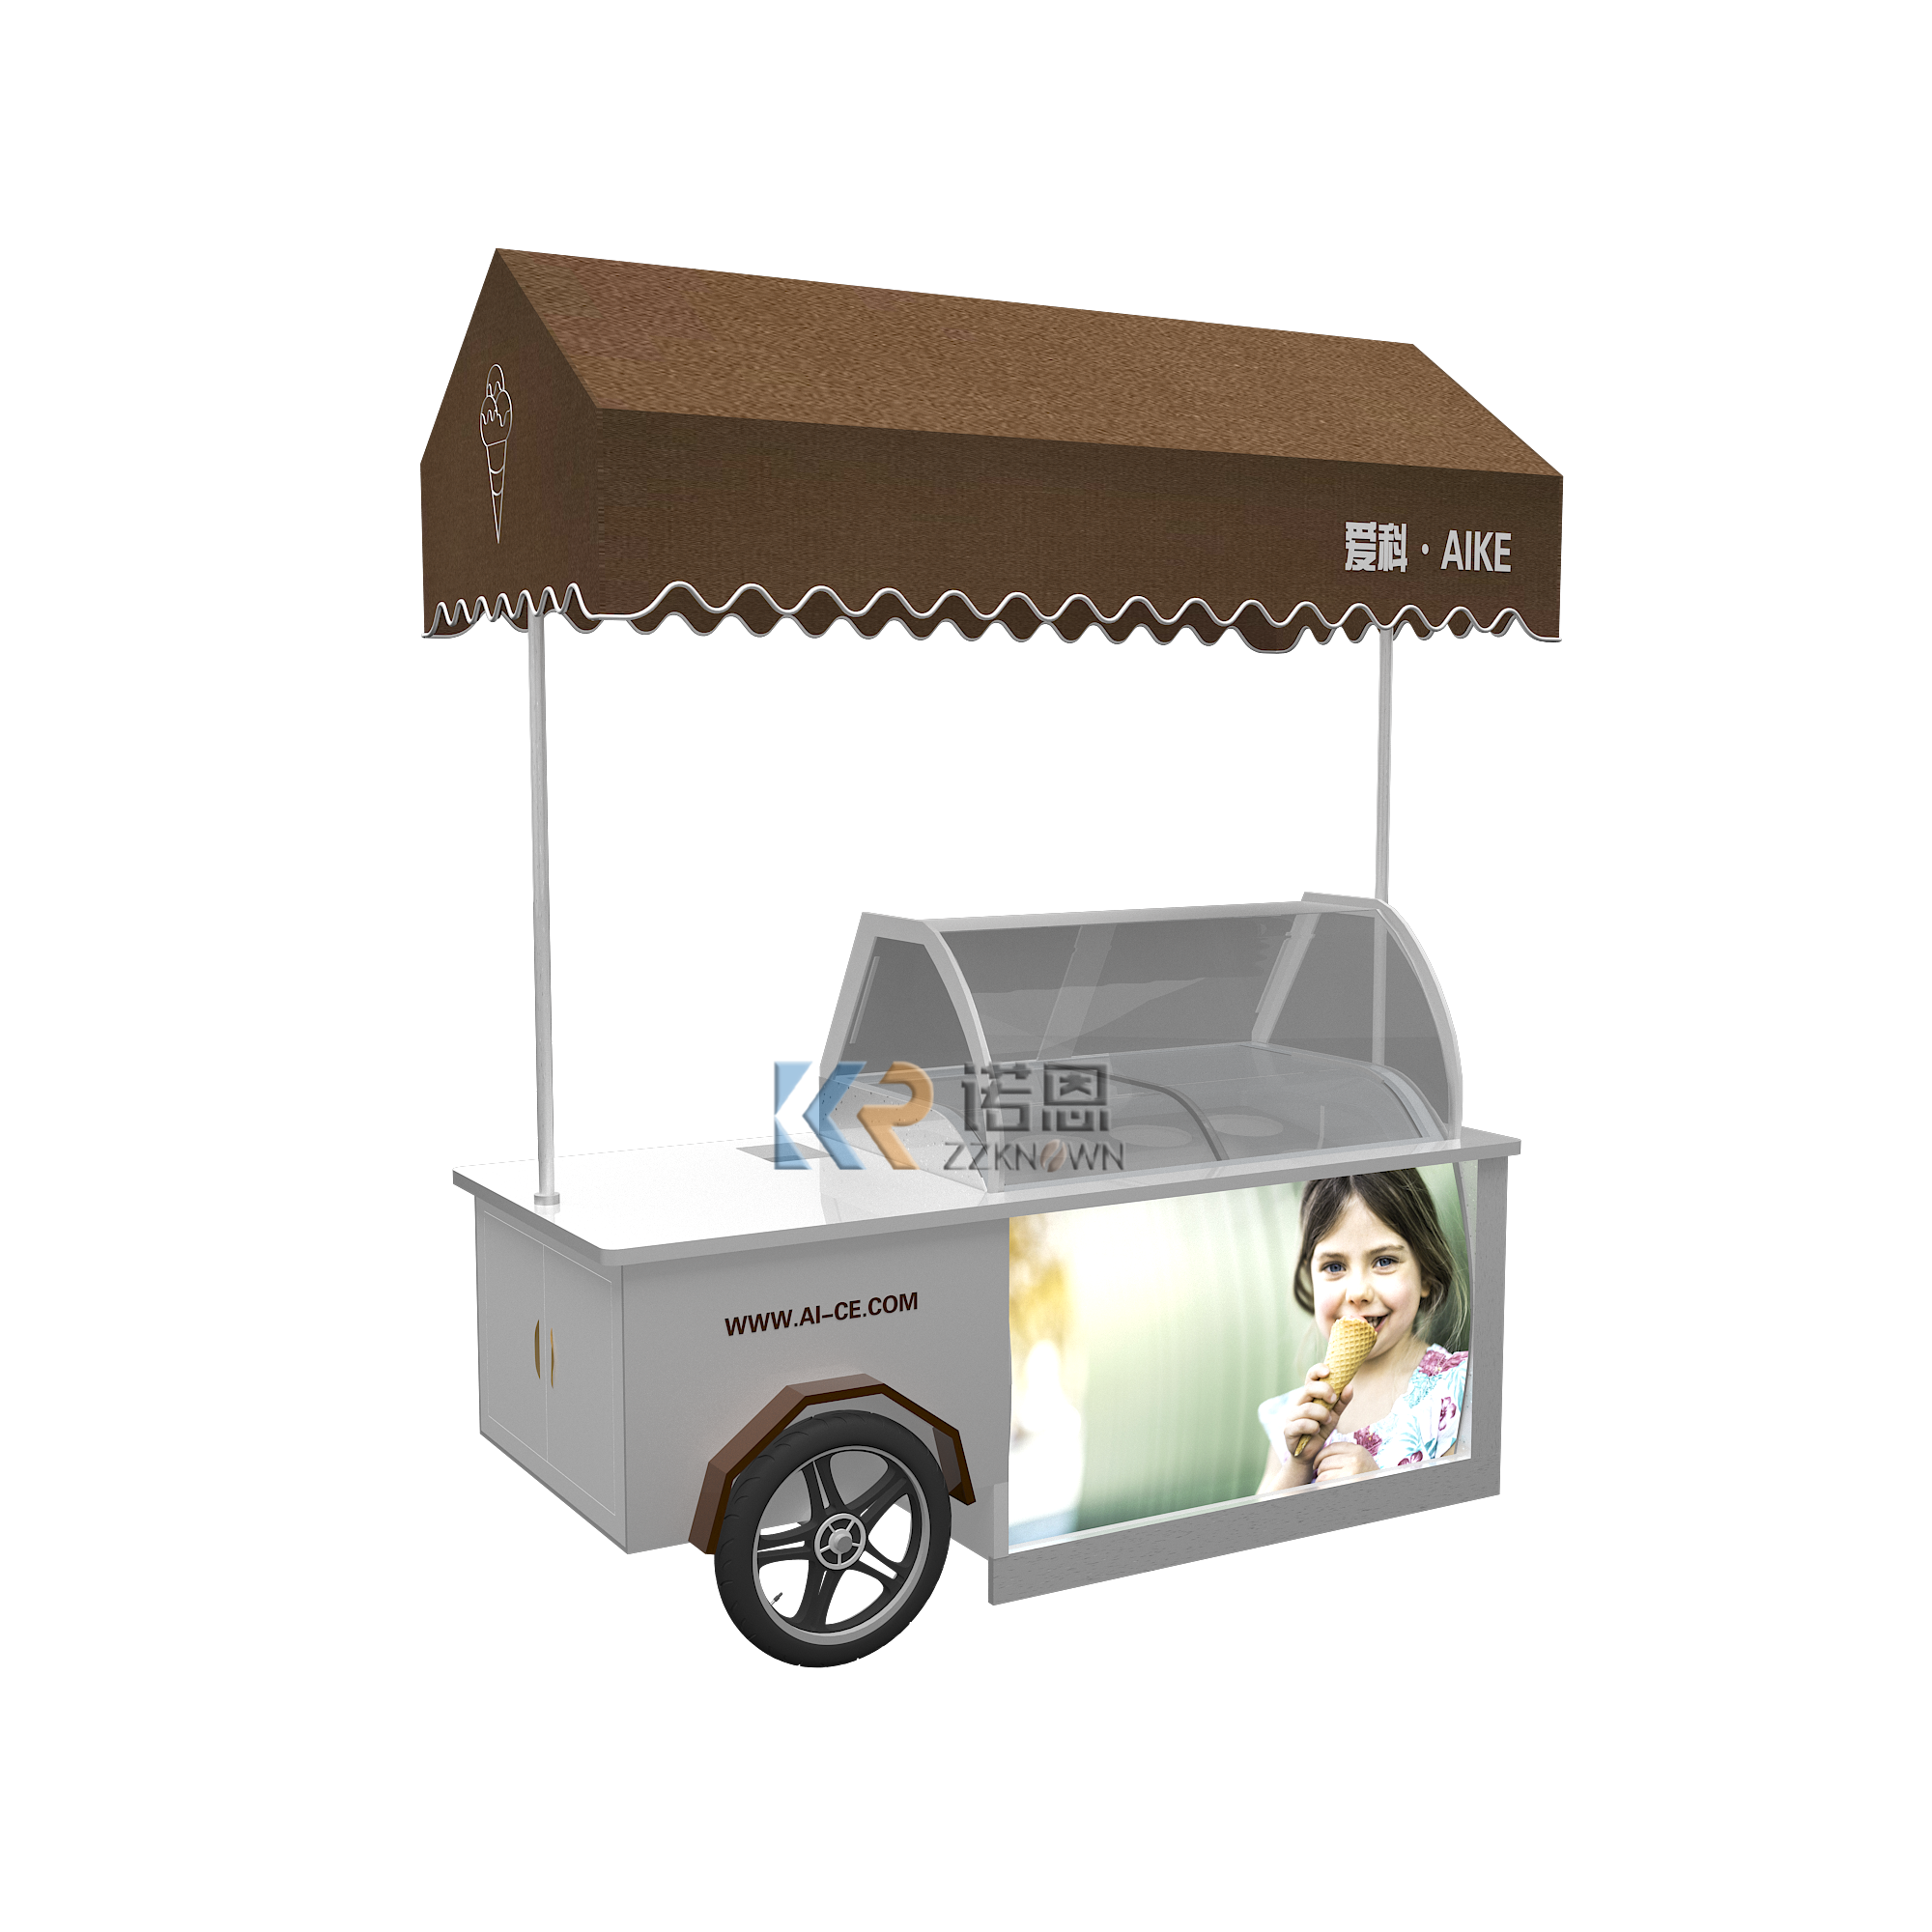 High Efficiency Bicycle Ice Cream Cart Bike Outdoor Mobile Ice Cream Truck Cart For Sale